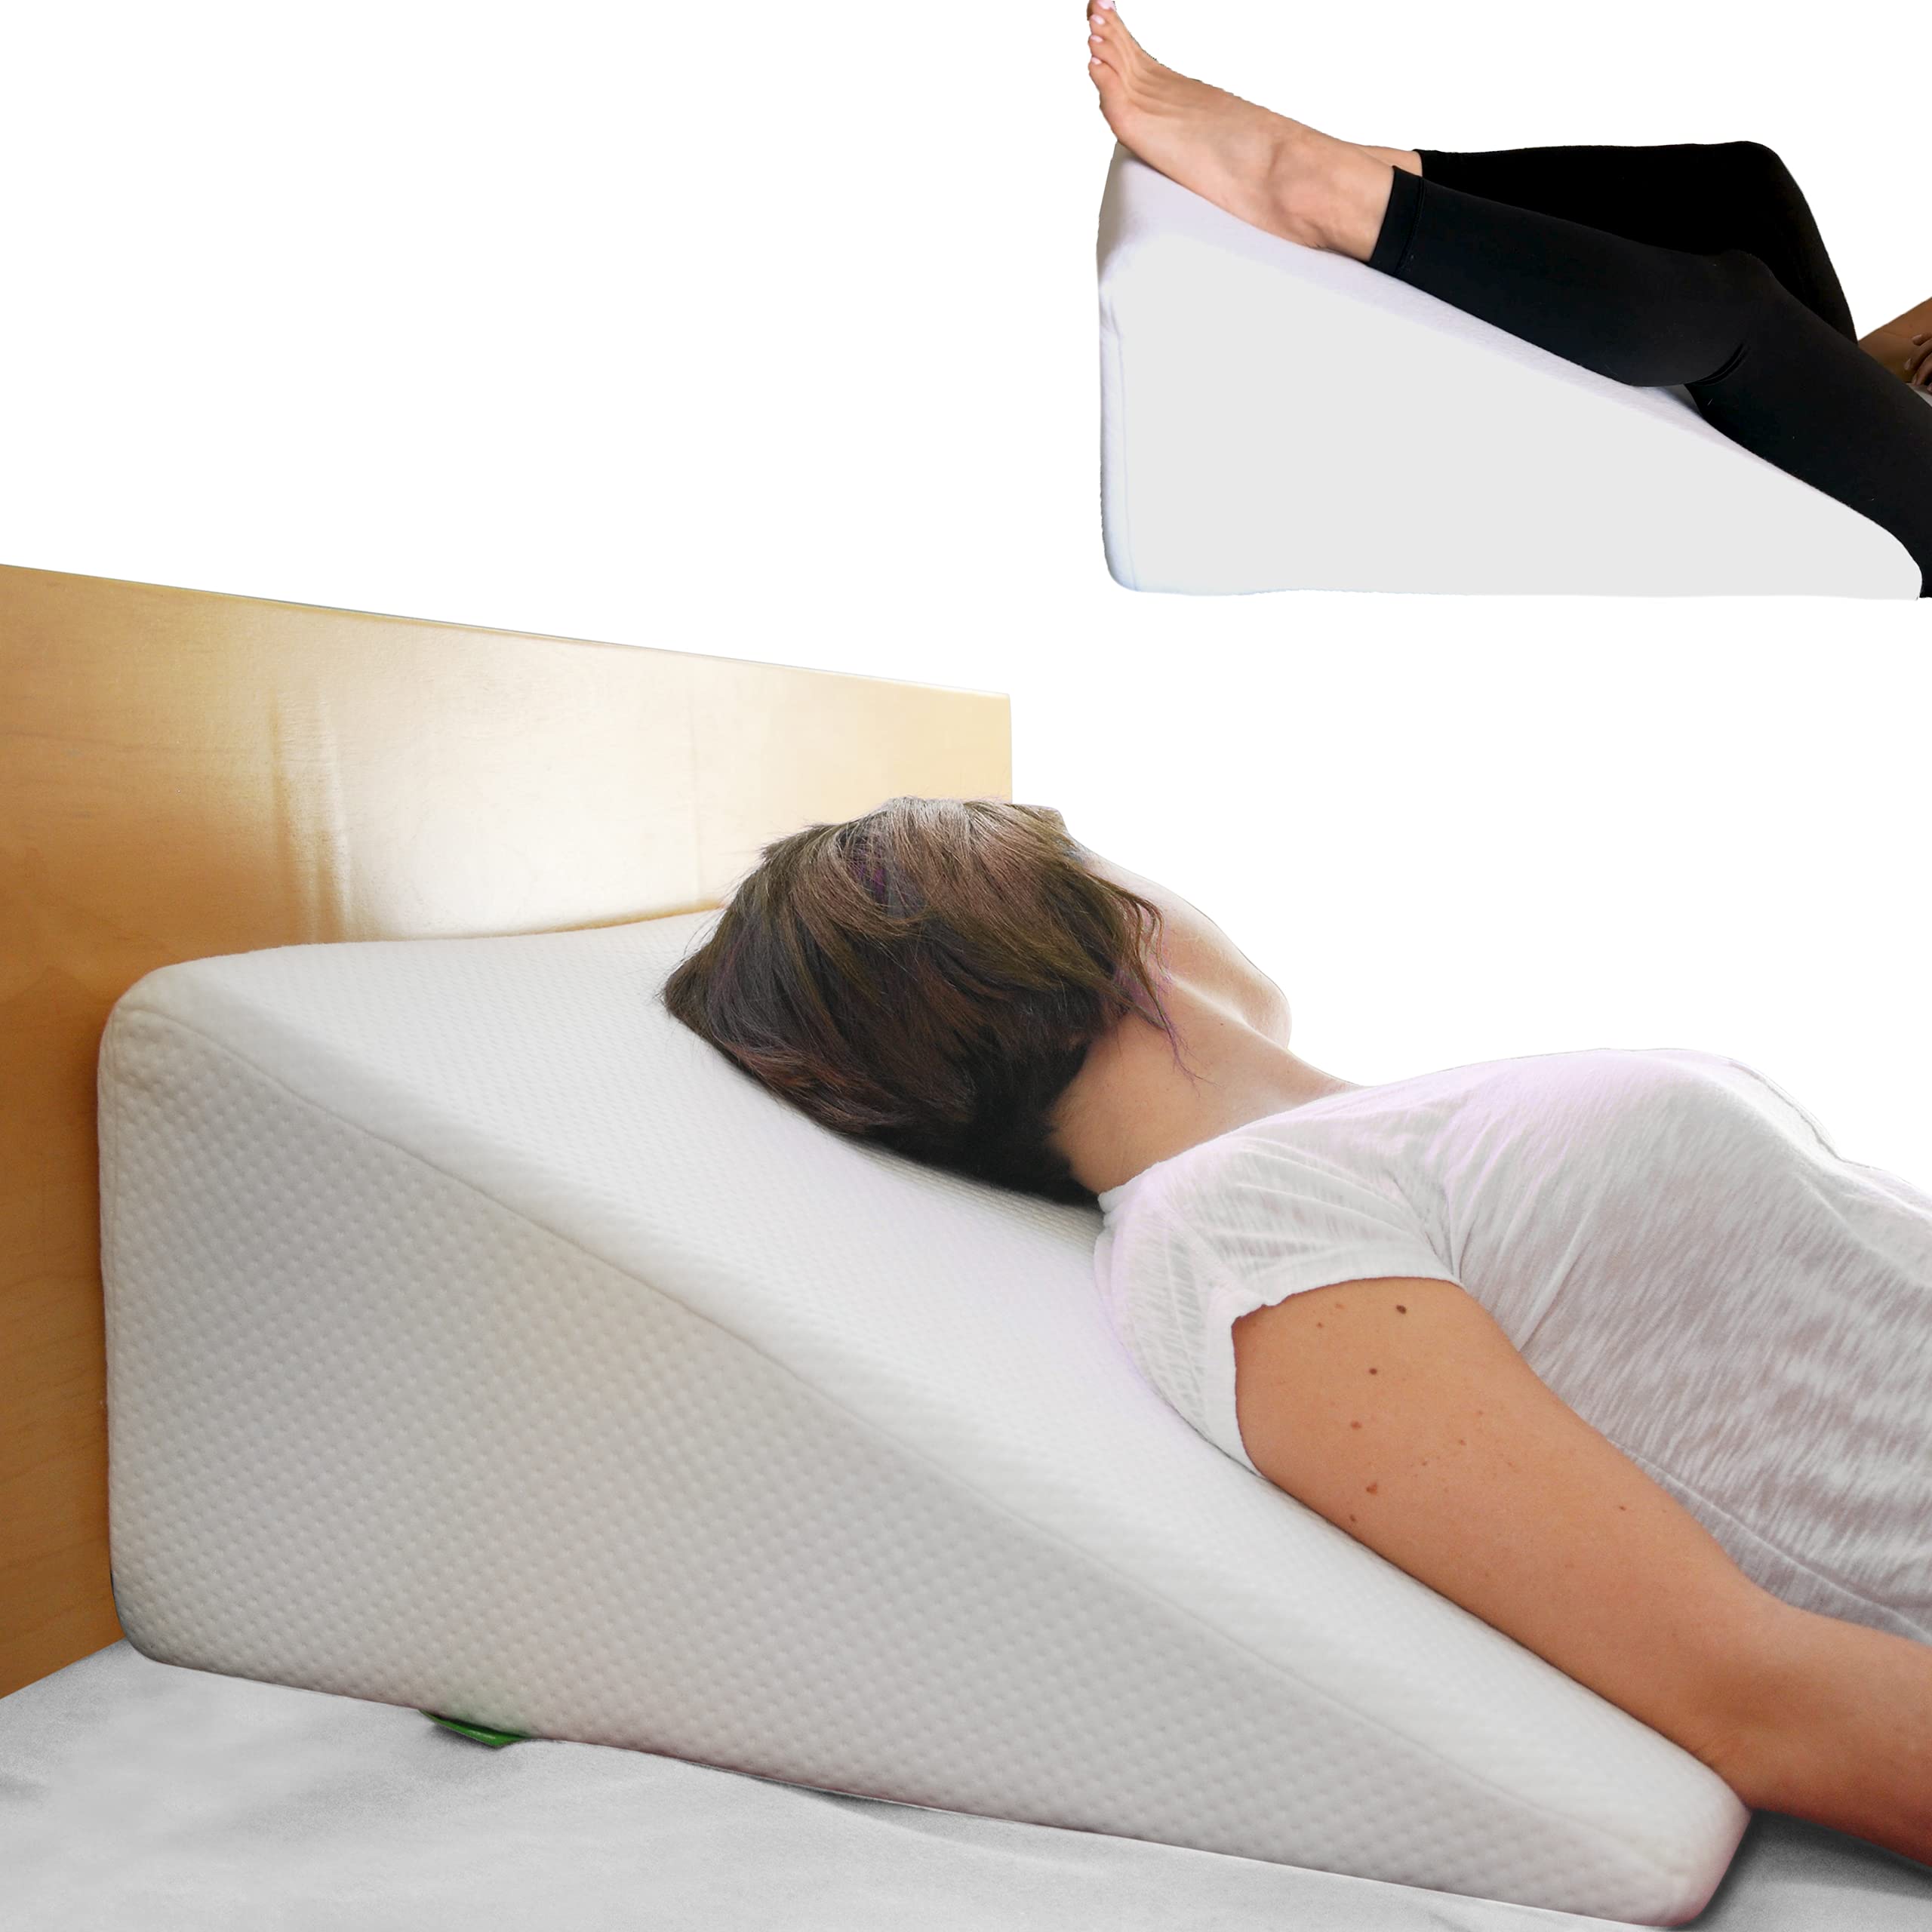 Wedge Pillows for Sleeping - Triangle Memory Foam Bed Support Rest for Back, Shoulder & Neck Discomfort - Multipurpose Bed Pillow & Knee Pillow for Support